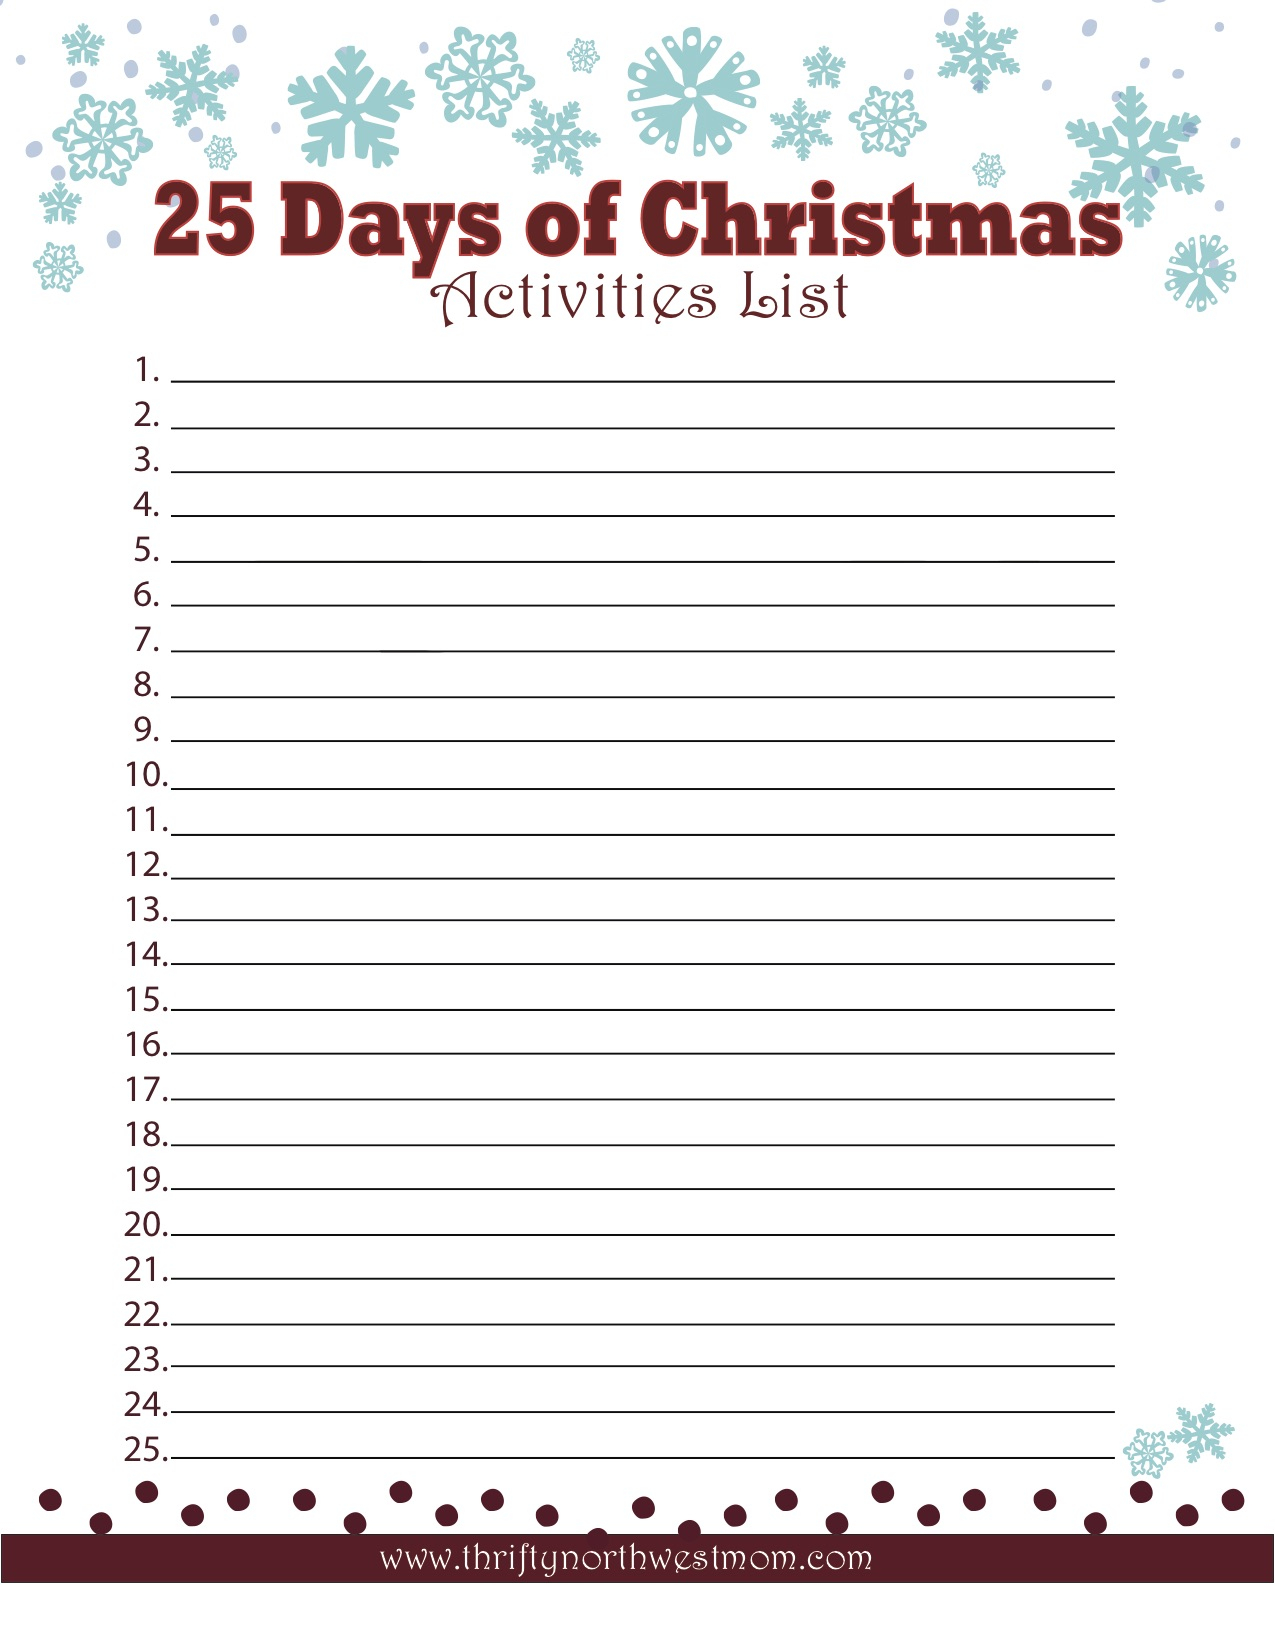 Celebrating The 25 Days Of Christmas ~ Activities List